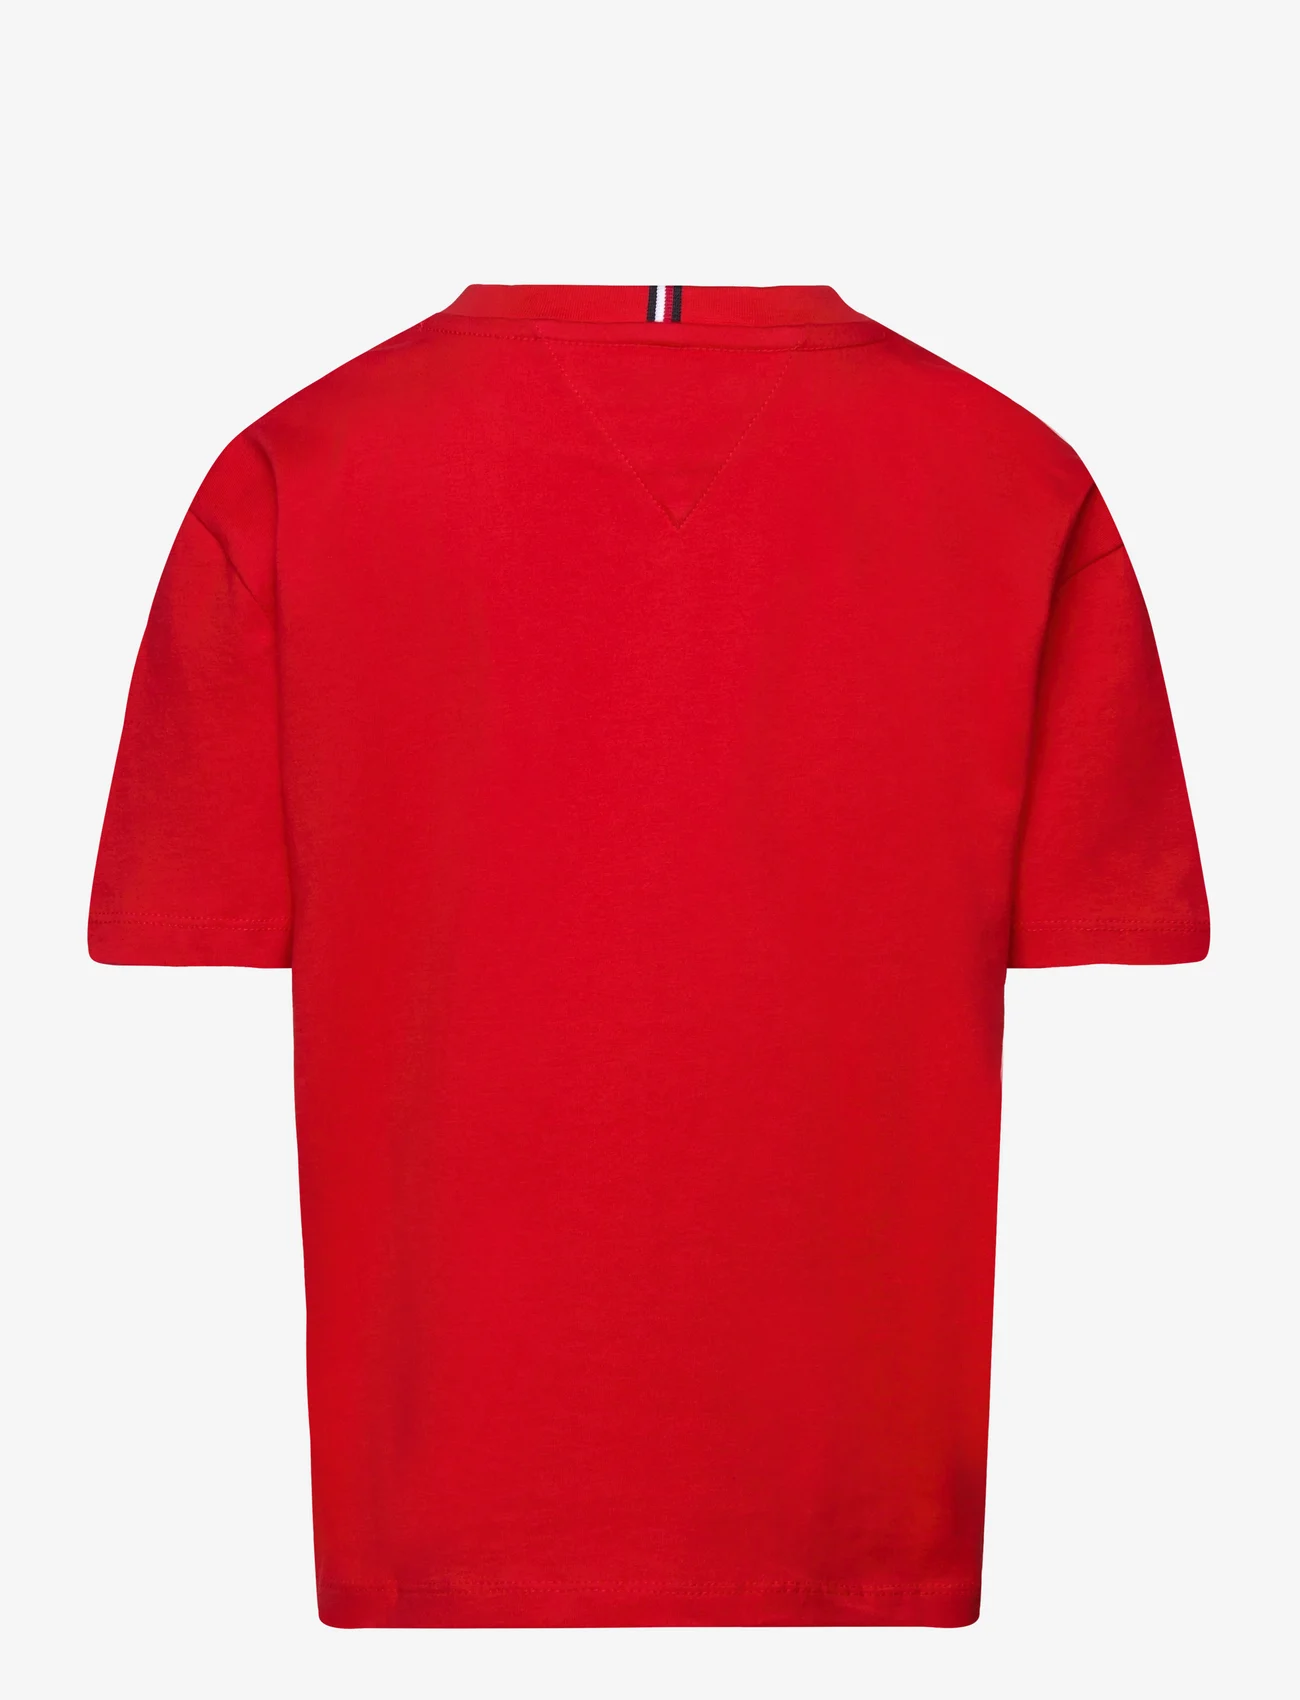 Tommy Hilfiger - ESSENTIAL TEE S/S - short-sleeved t-shirts - fierce red - 1